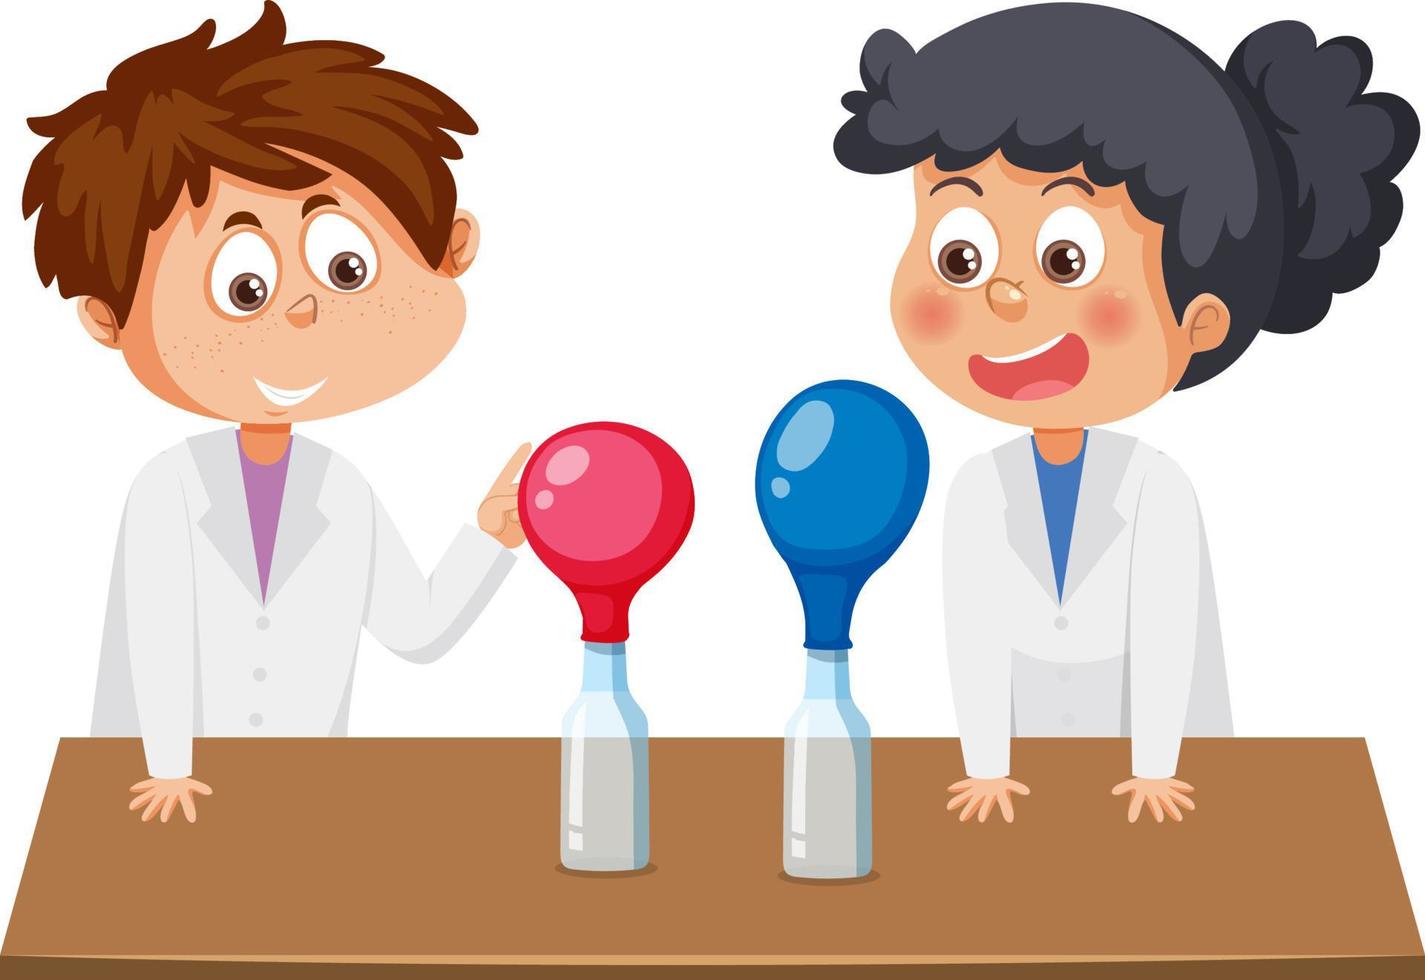 Student with baking soda and vinegar experiment vector